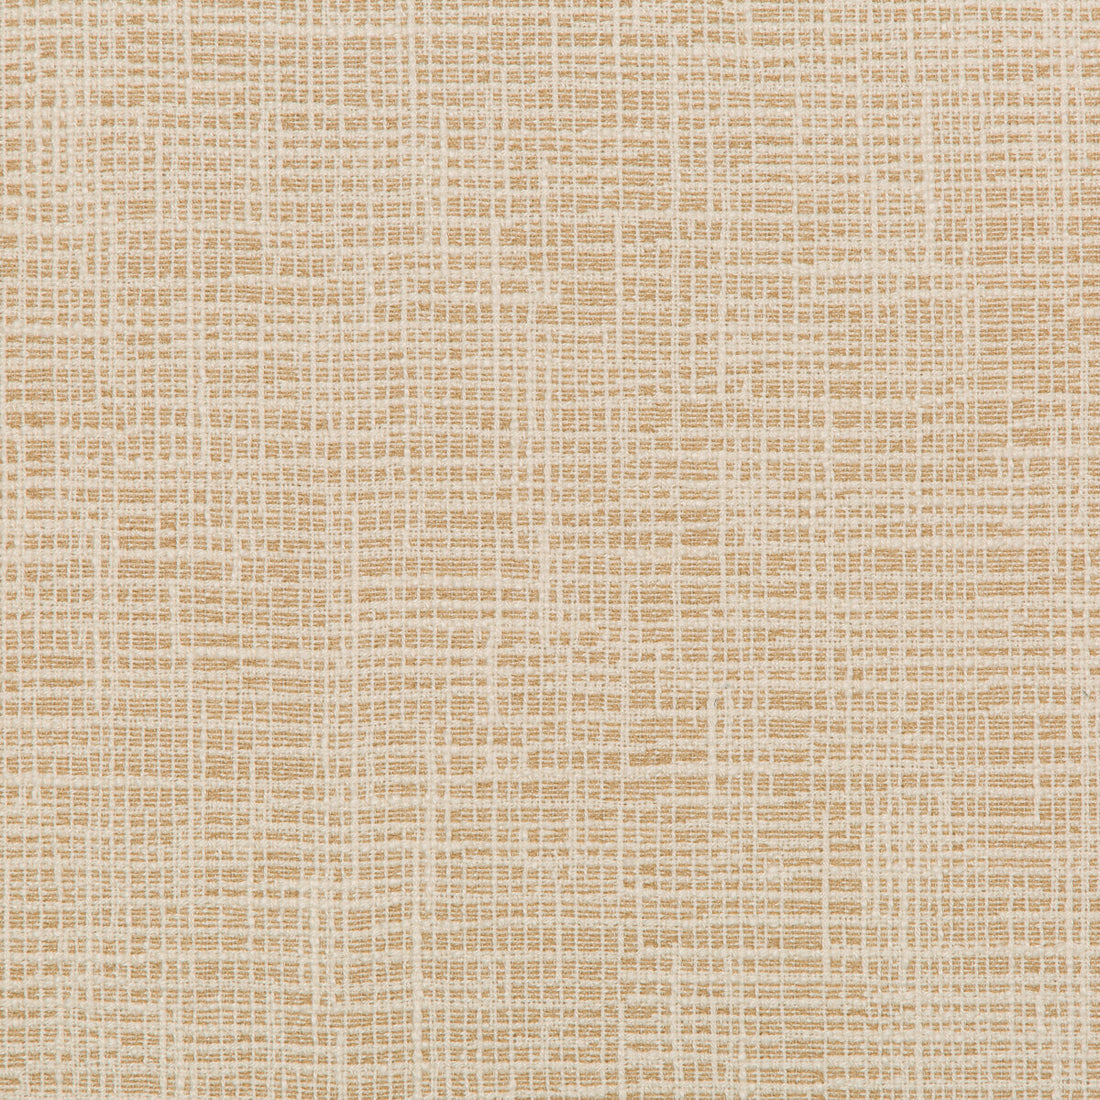 Kravet Design fabric in 36083-1616 color - pattern 36083.1616.0 - by Kravet Design in the Inside Out Performance Fabrics collection